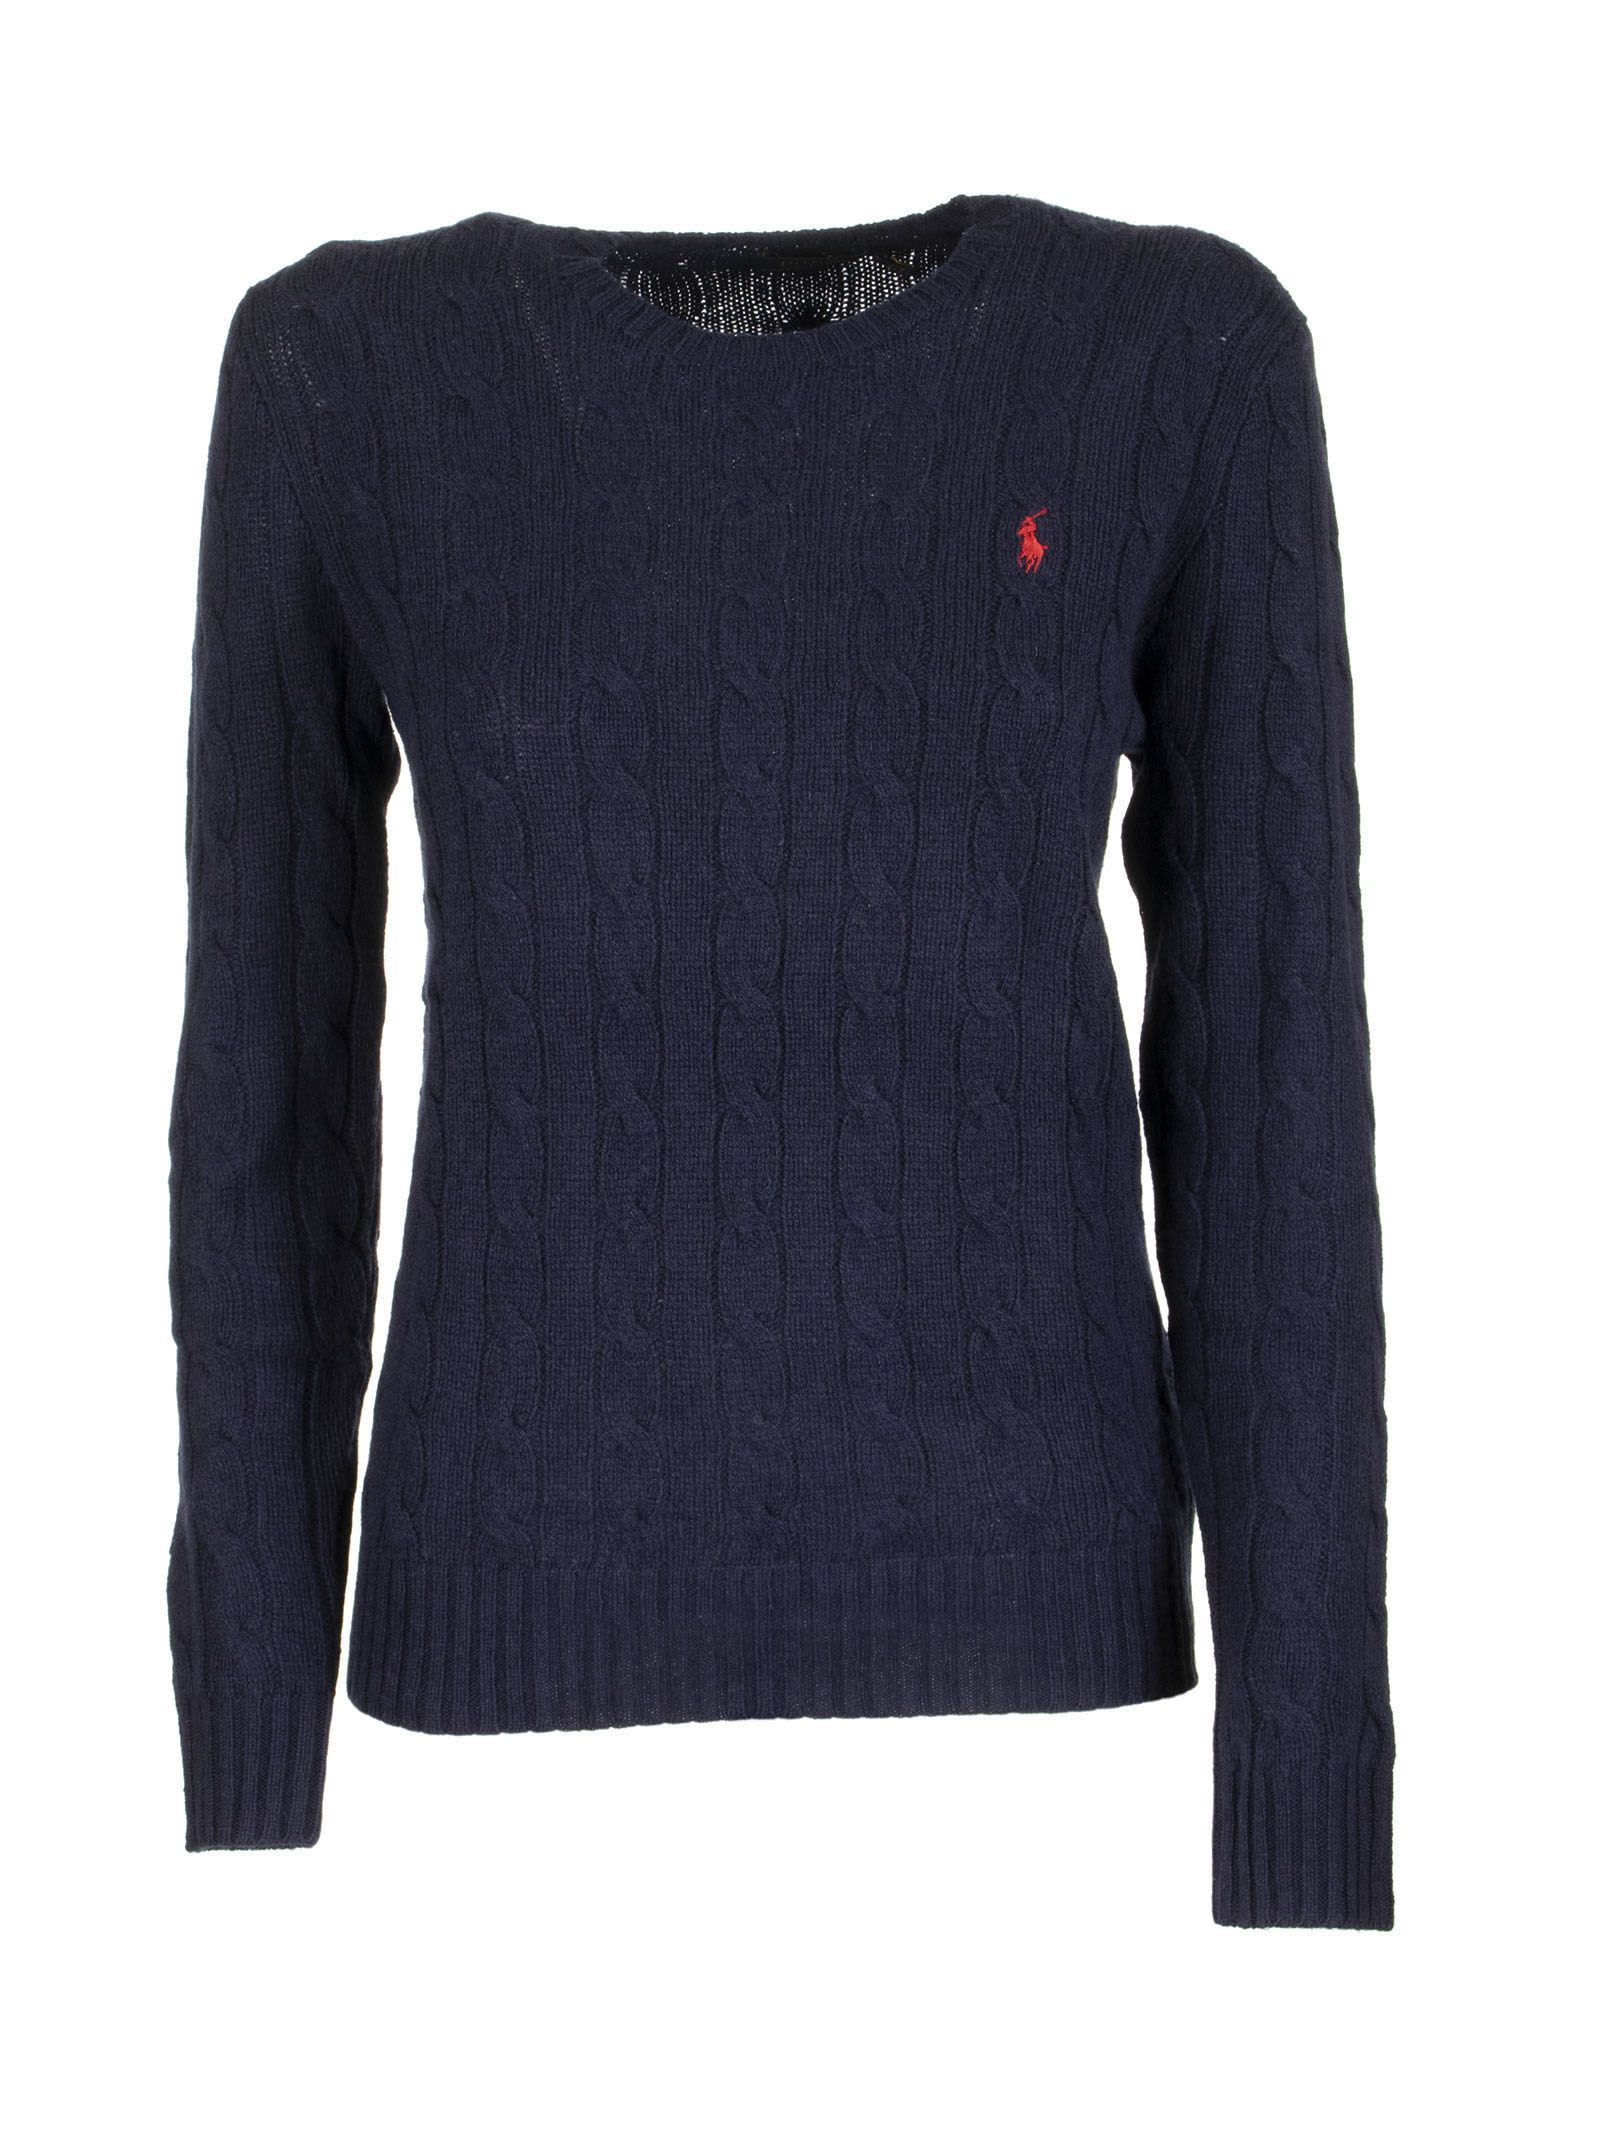 Ralph Lauren Cable Knit Wool And Cashmere Sweater